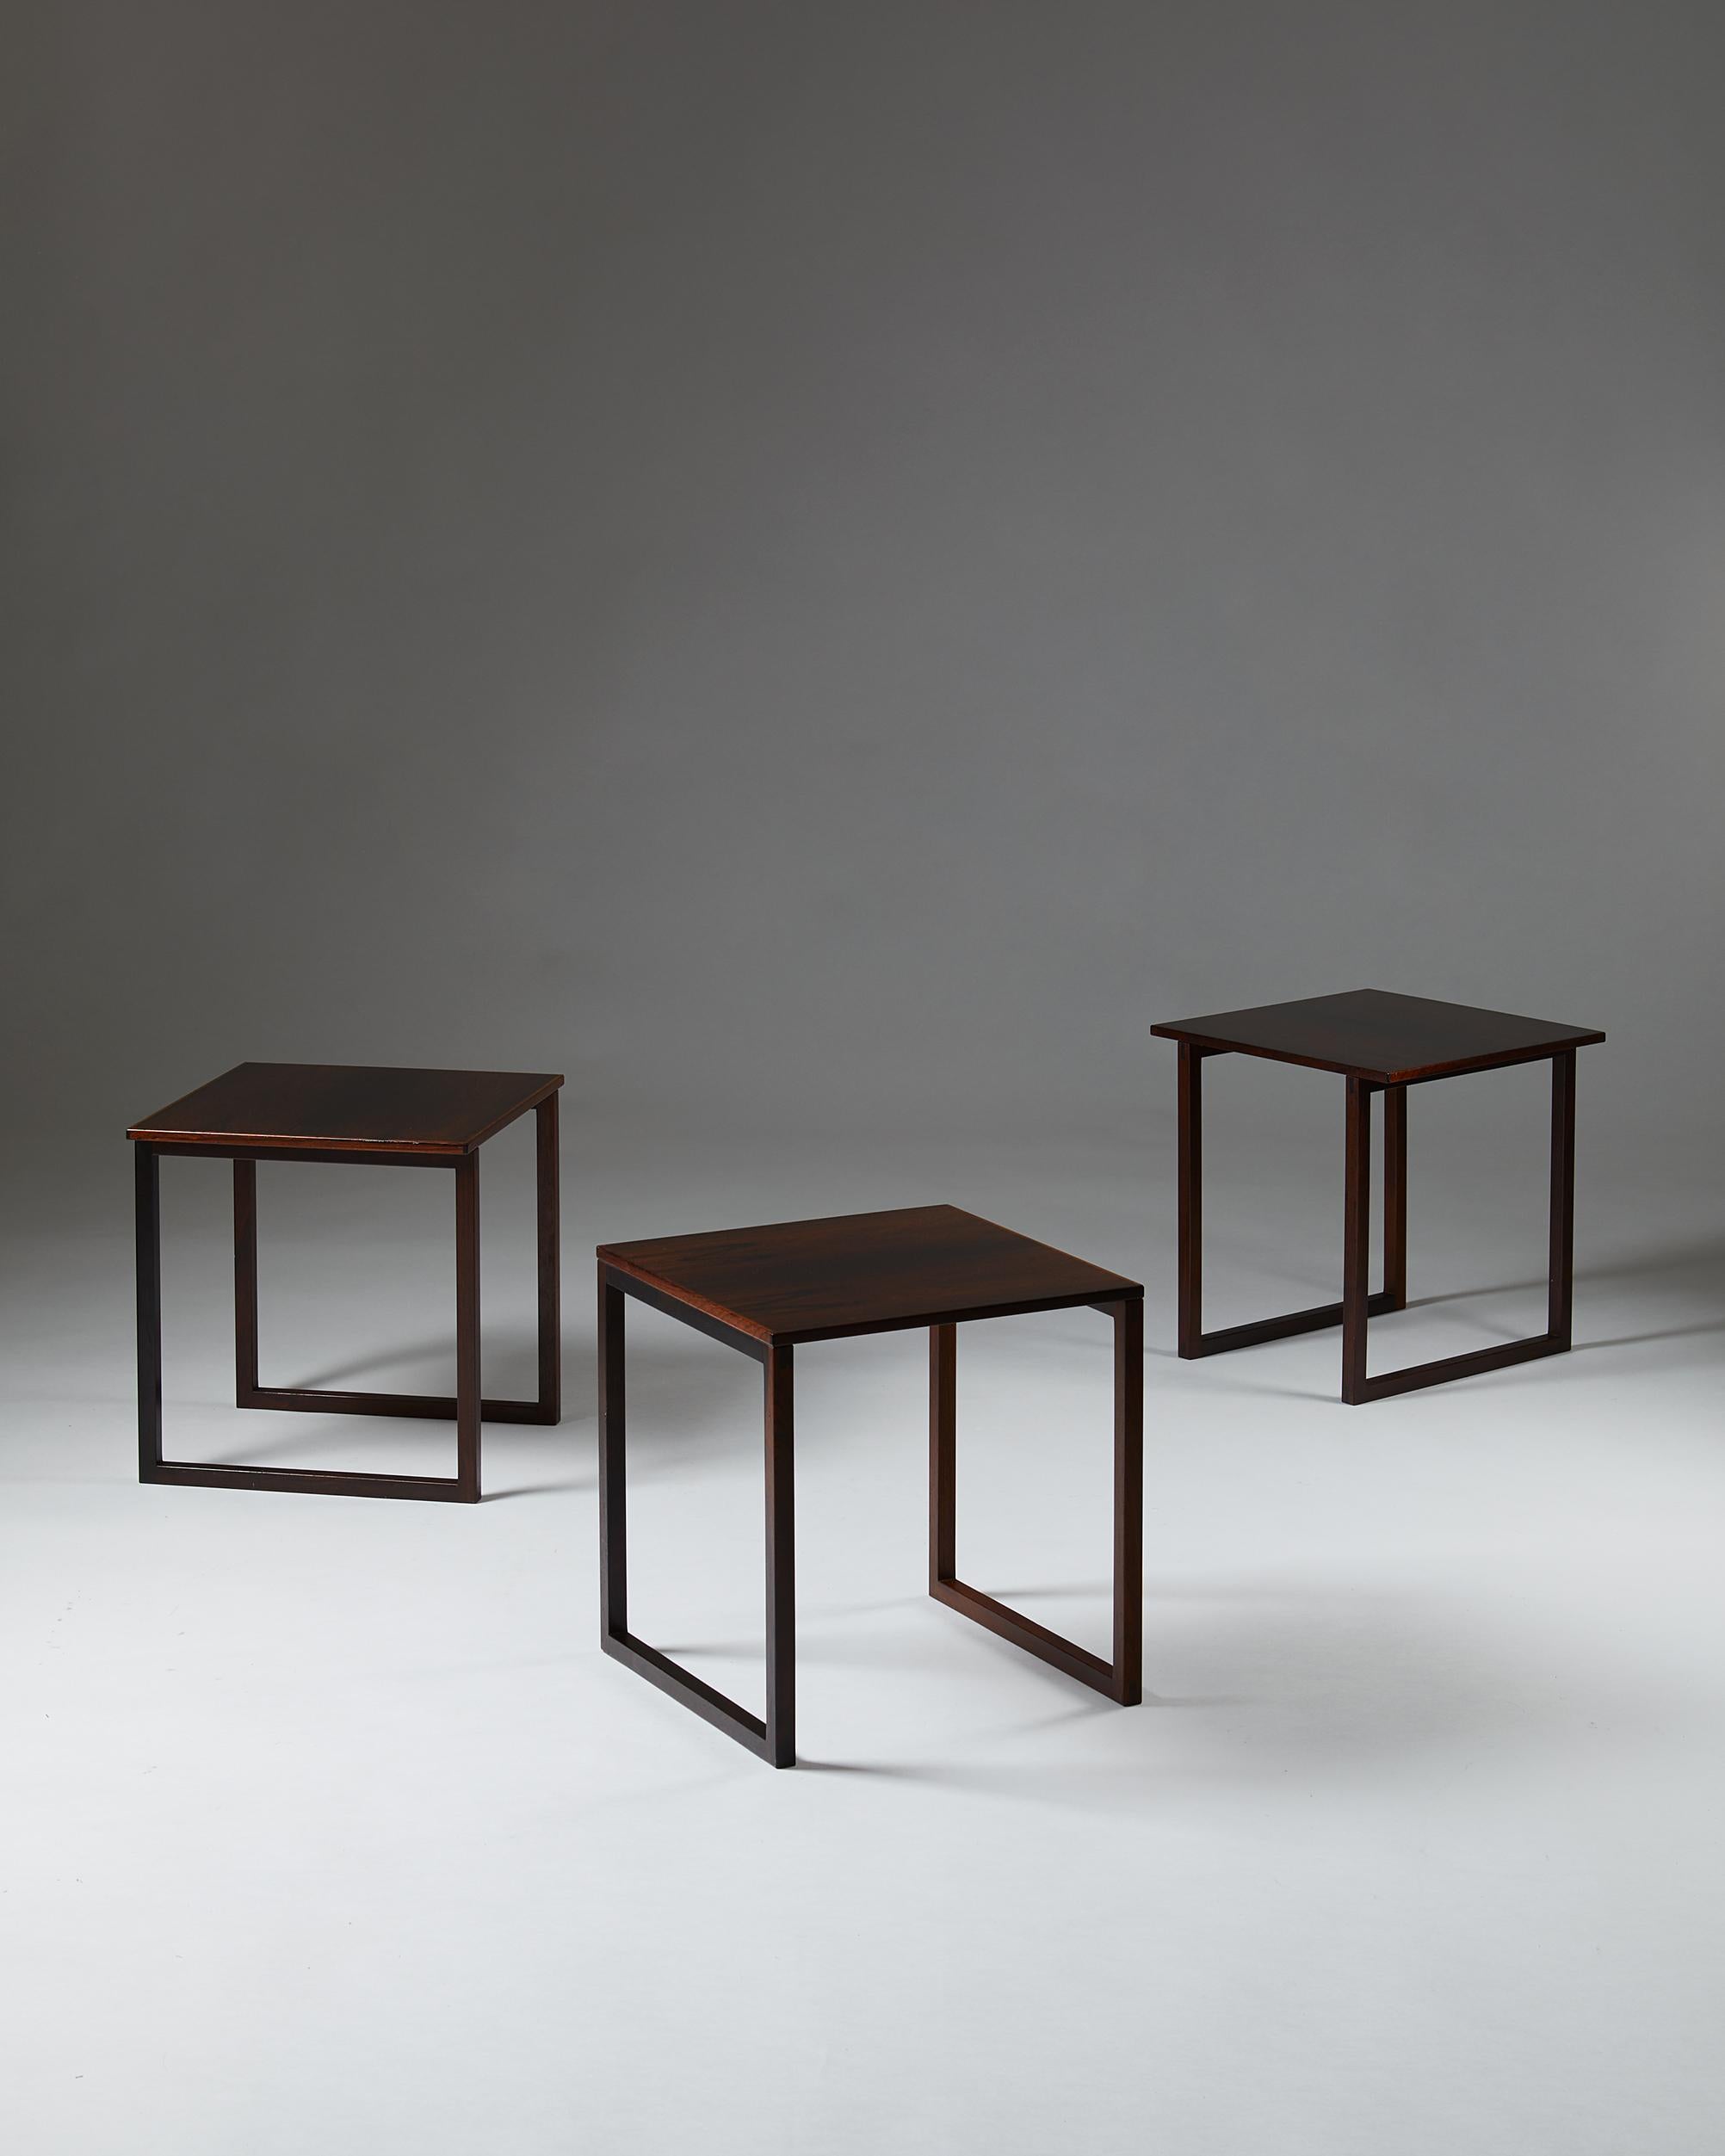 Set of three nesting tables, anonymous,
Denmark, 1950s.

Rosewood.

Dimensions:
H: 42 cm
D: 40 cm
W: 40 cm

Stamped VM.